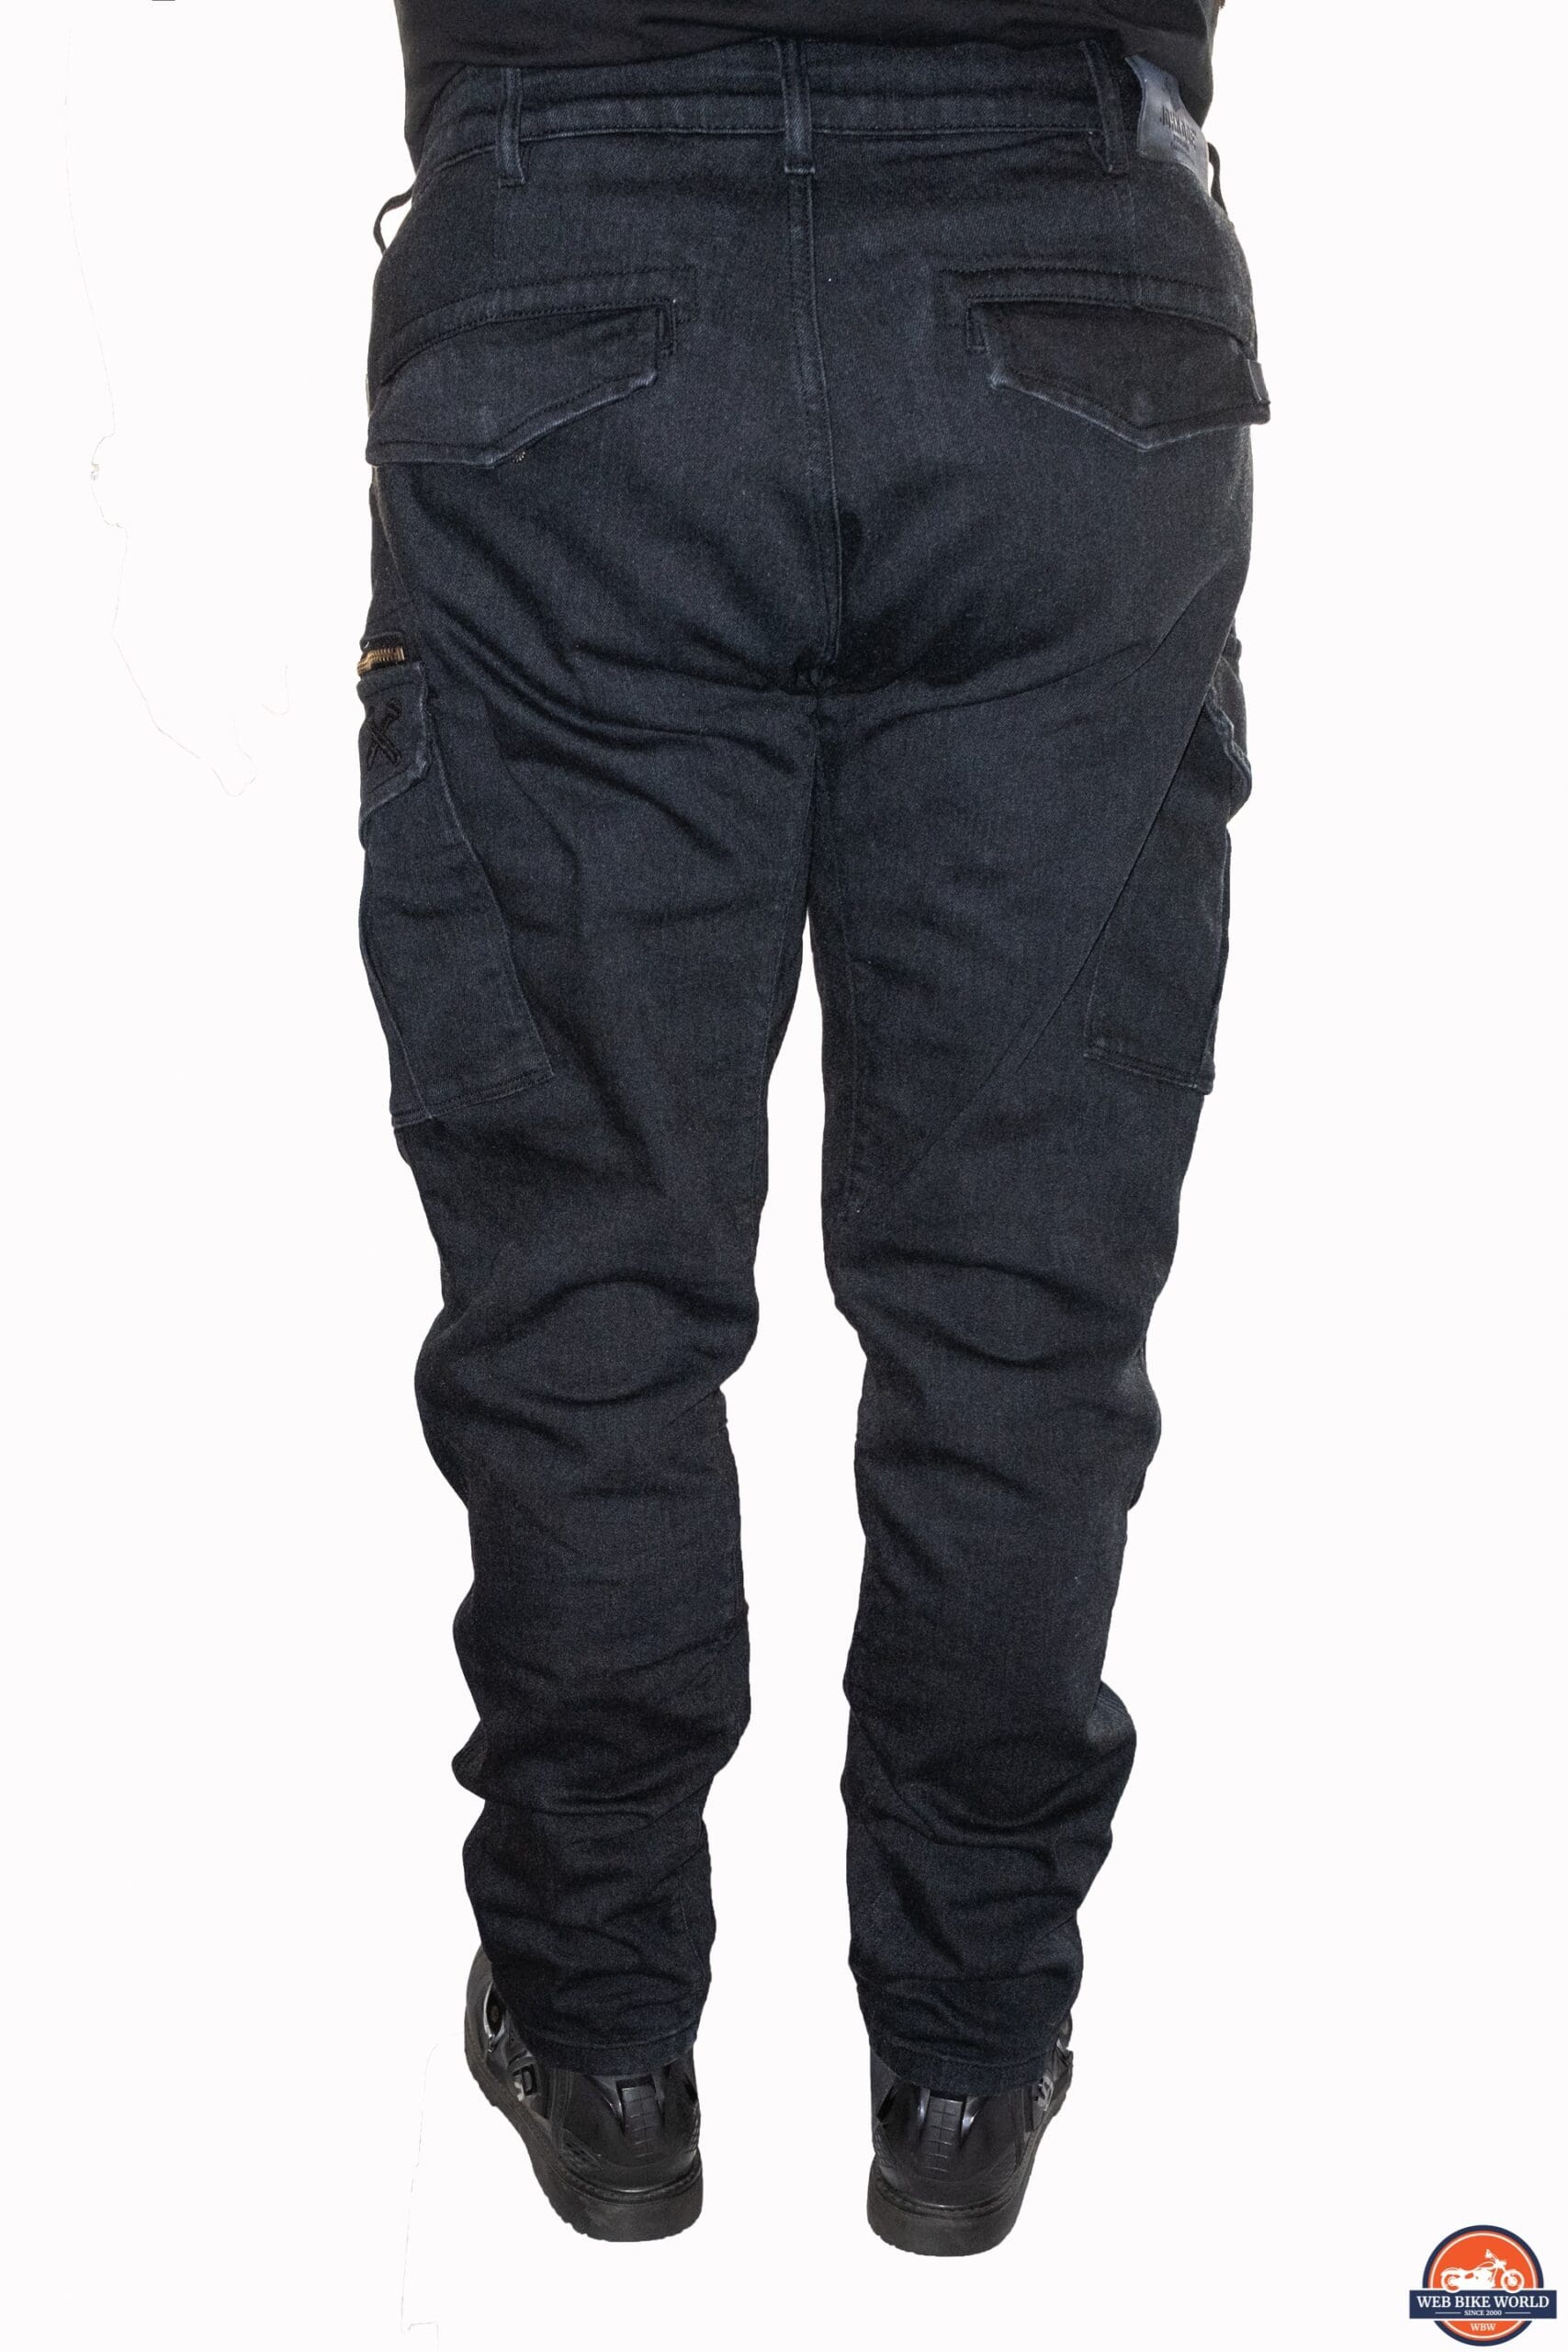 ARCANE ARMORED CARGO JOGGERS “NEW” - Pants